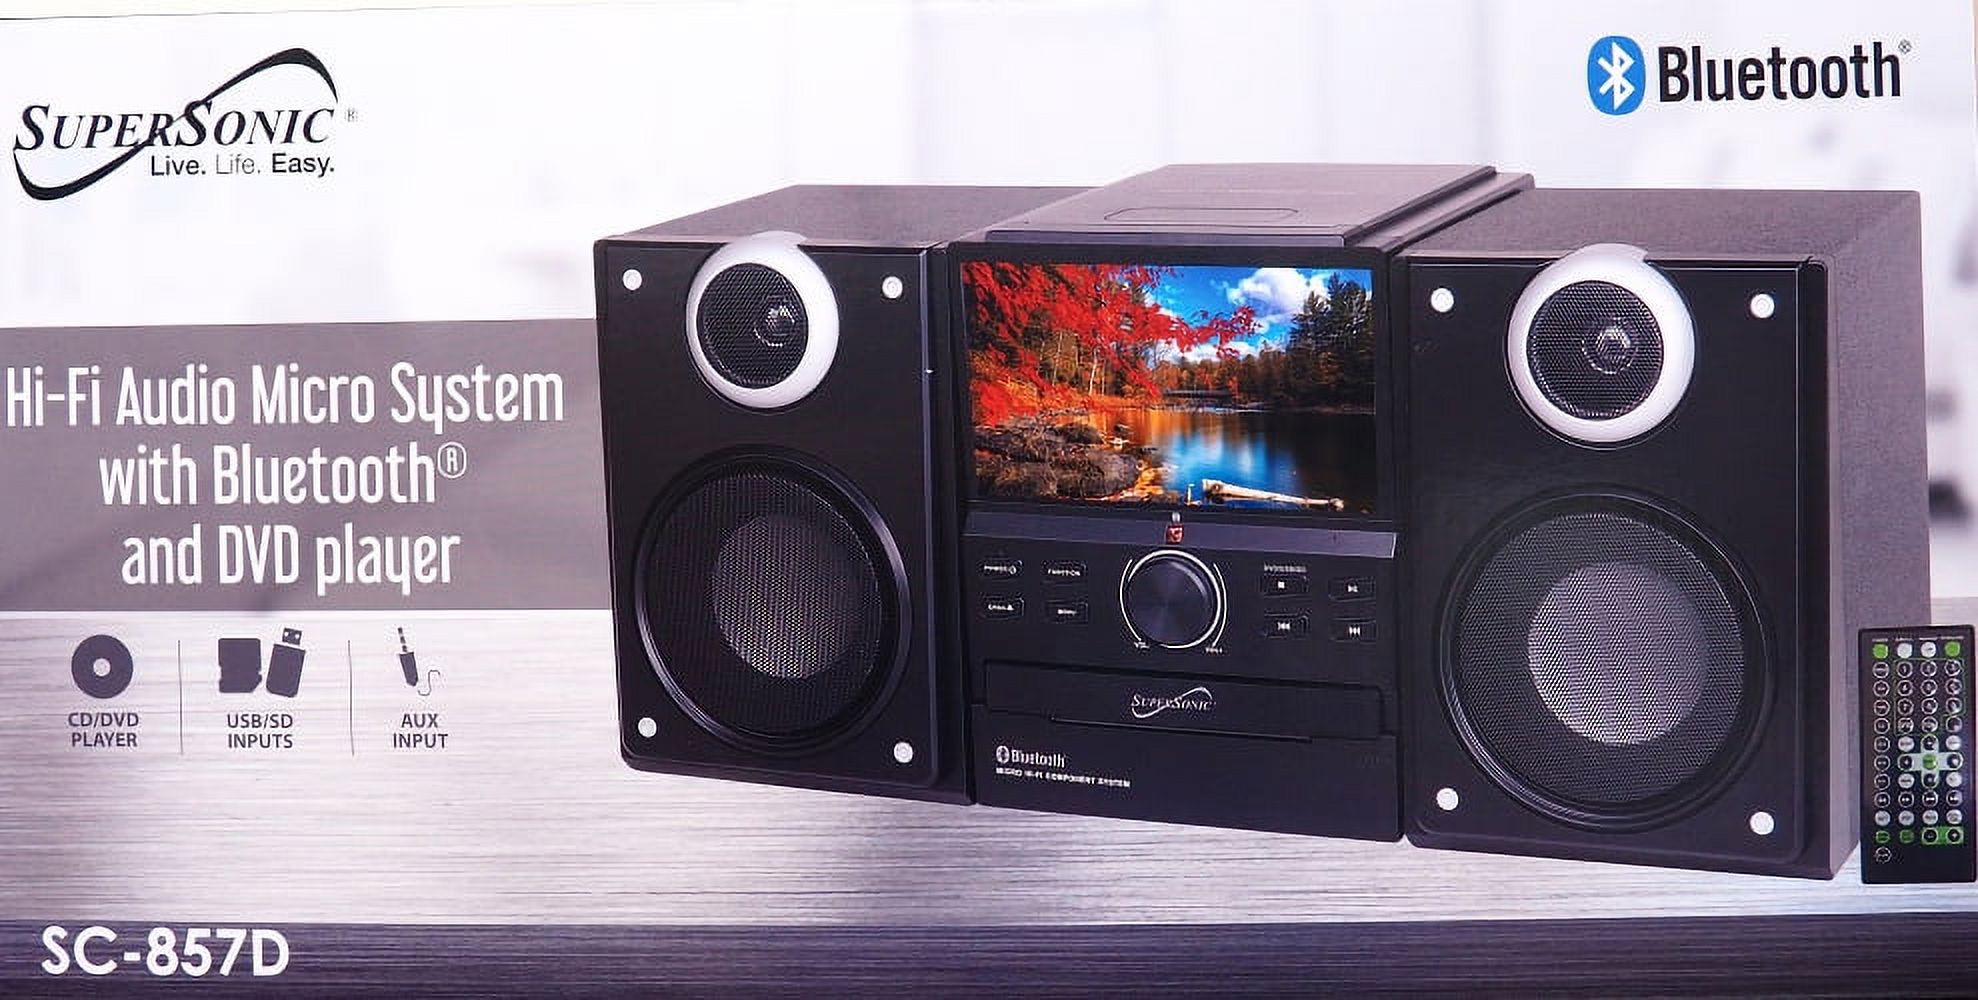 Supersonic Hi-Fi Audio Micro System with Bluetooth and DVD Player - image 5 of 5